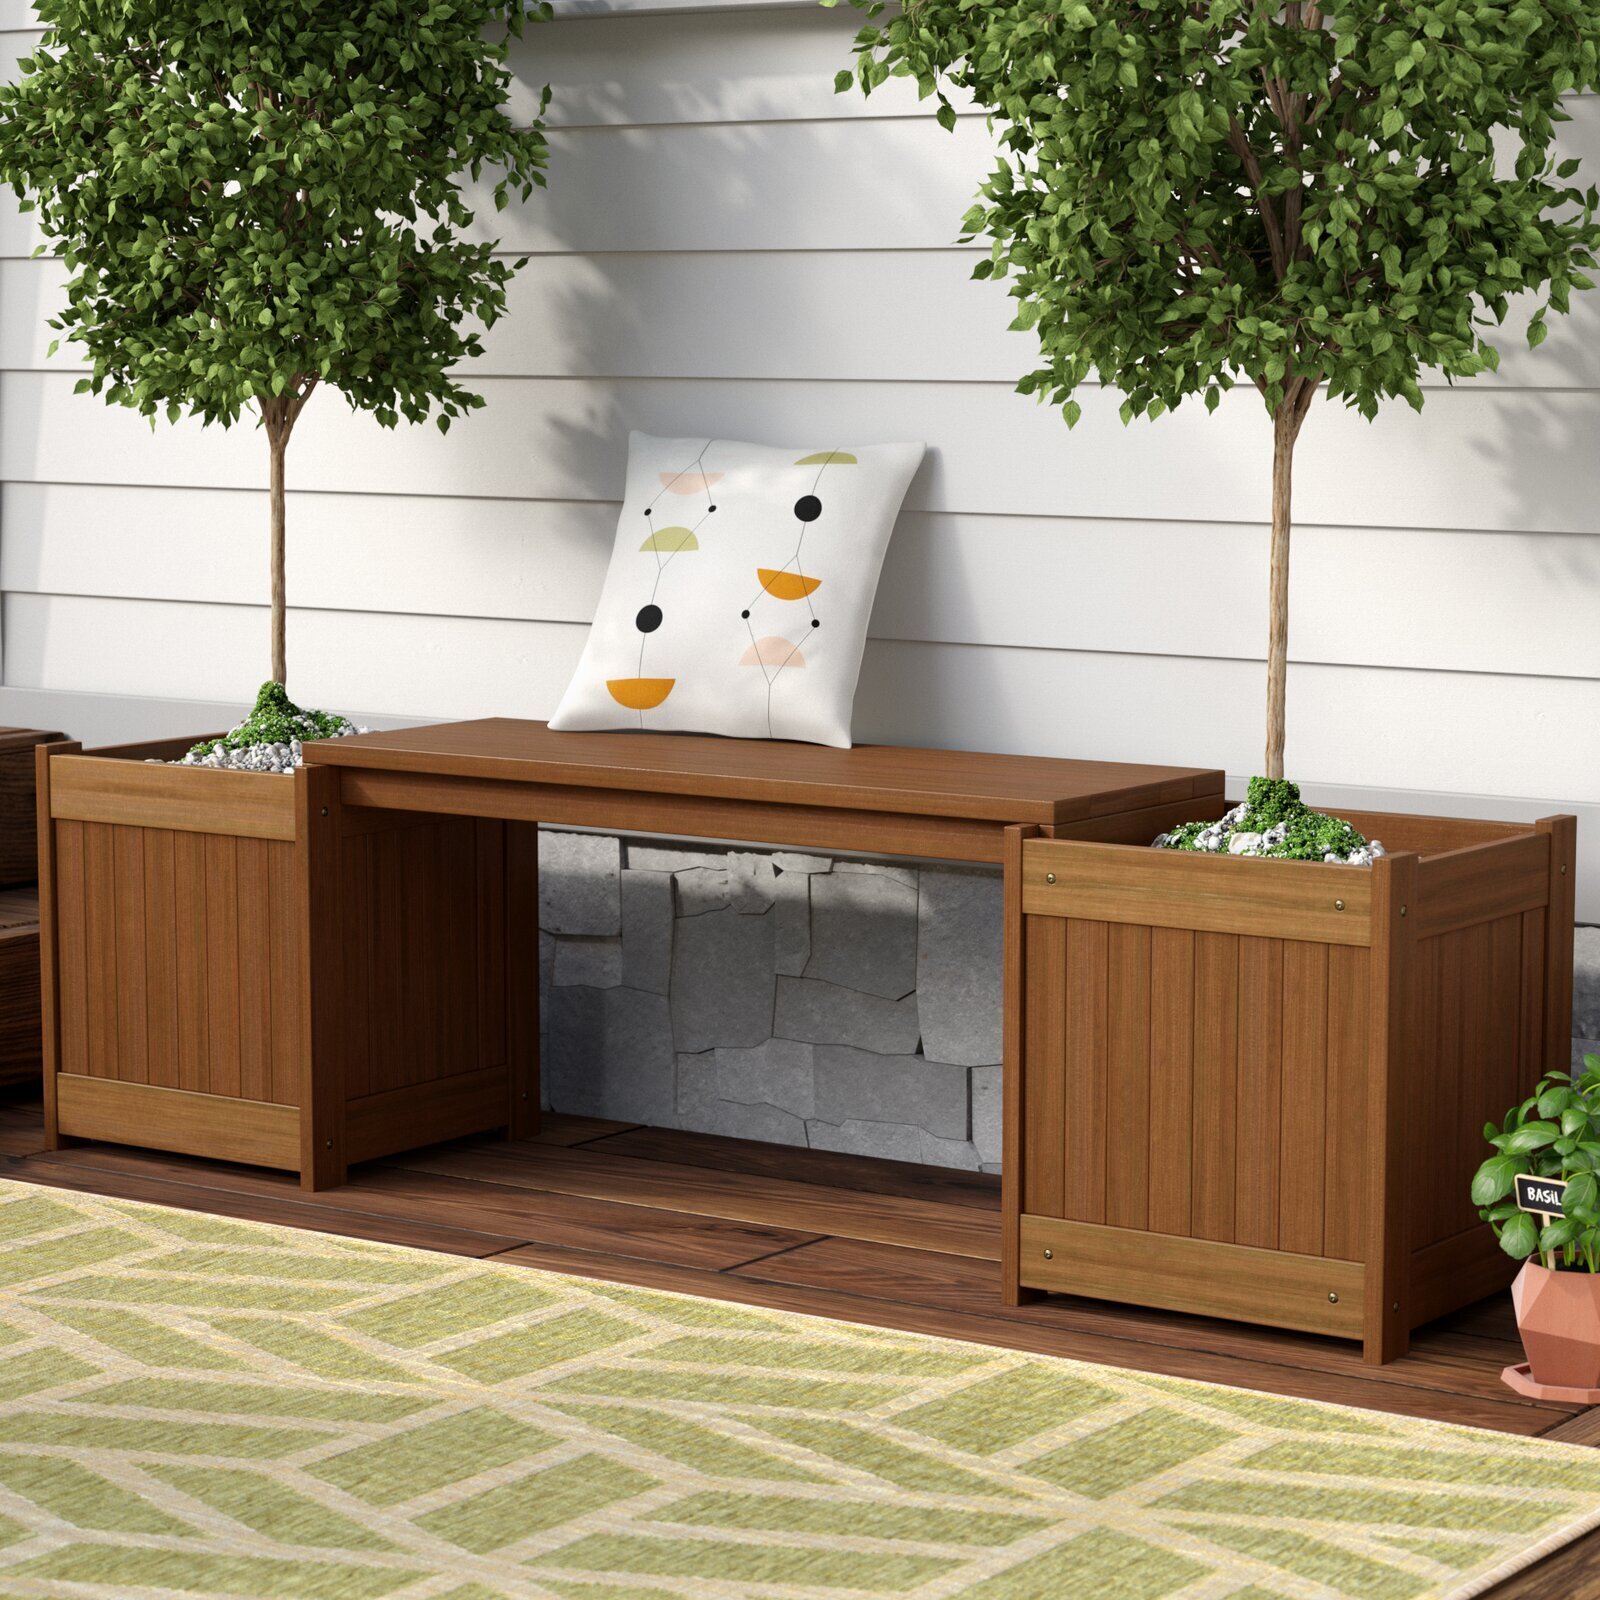 Solid hardwood planters with bench seating